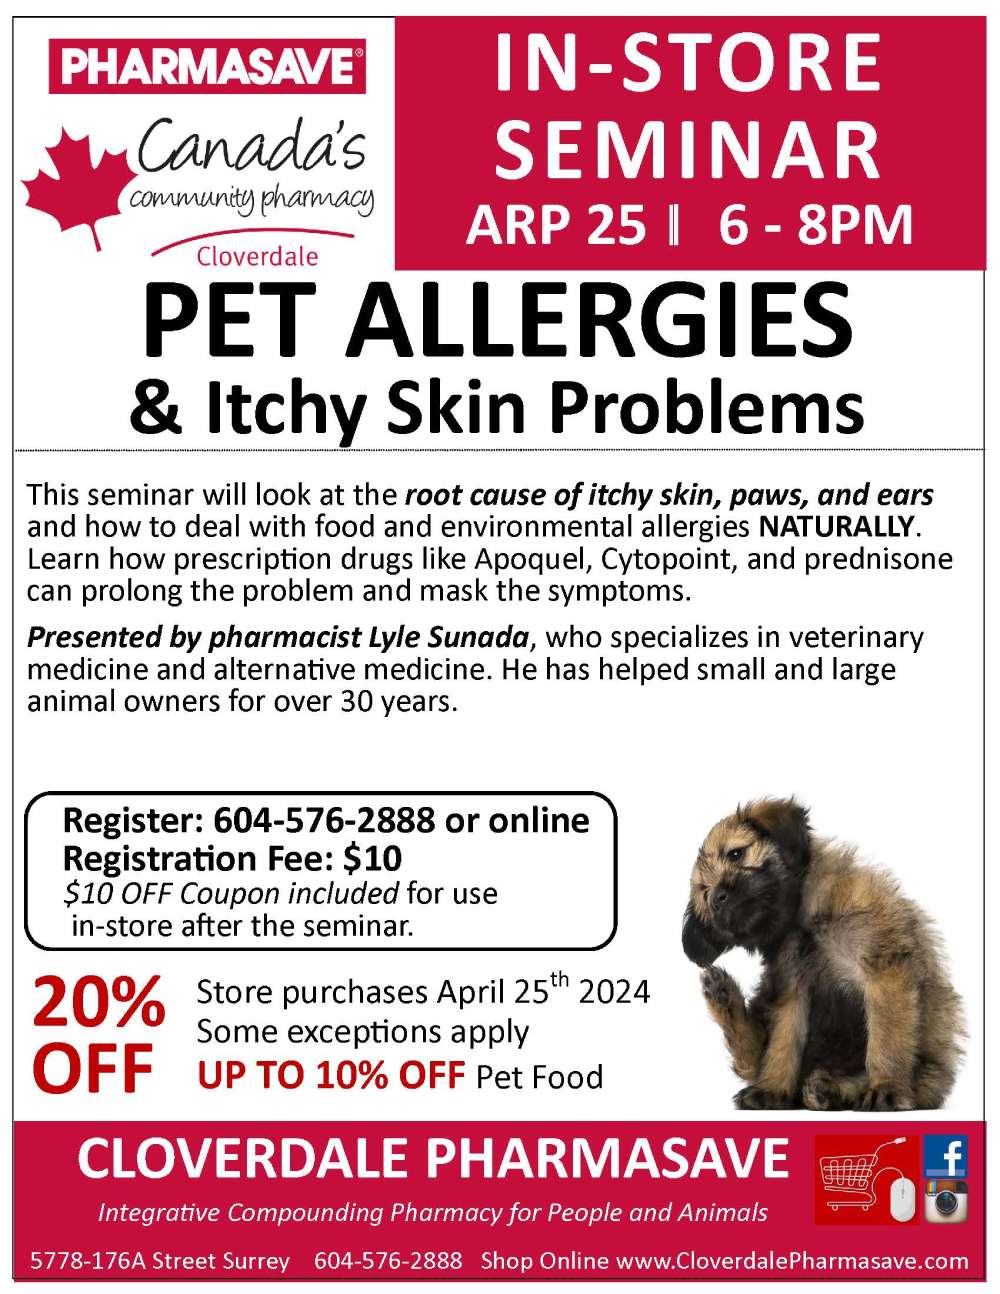 Pet Allergies and Itchy Skin Problems